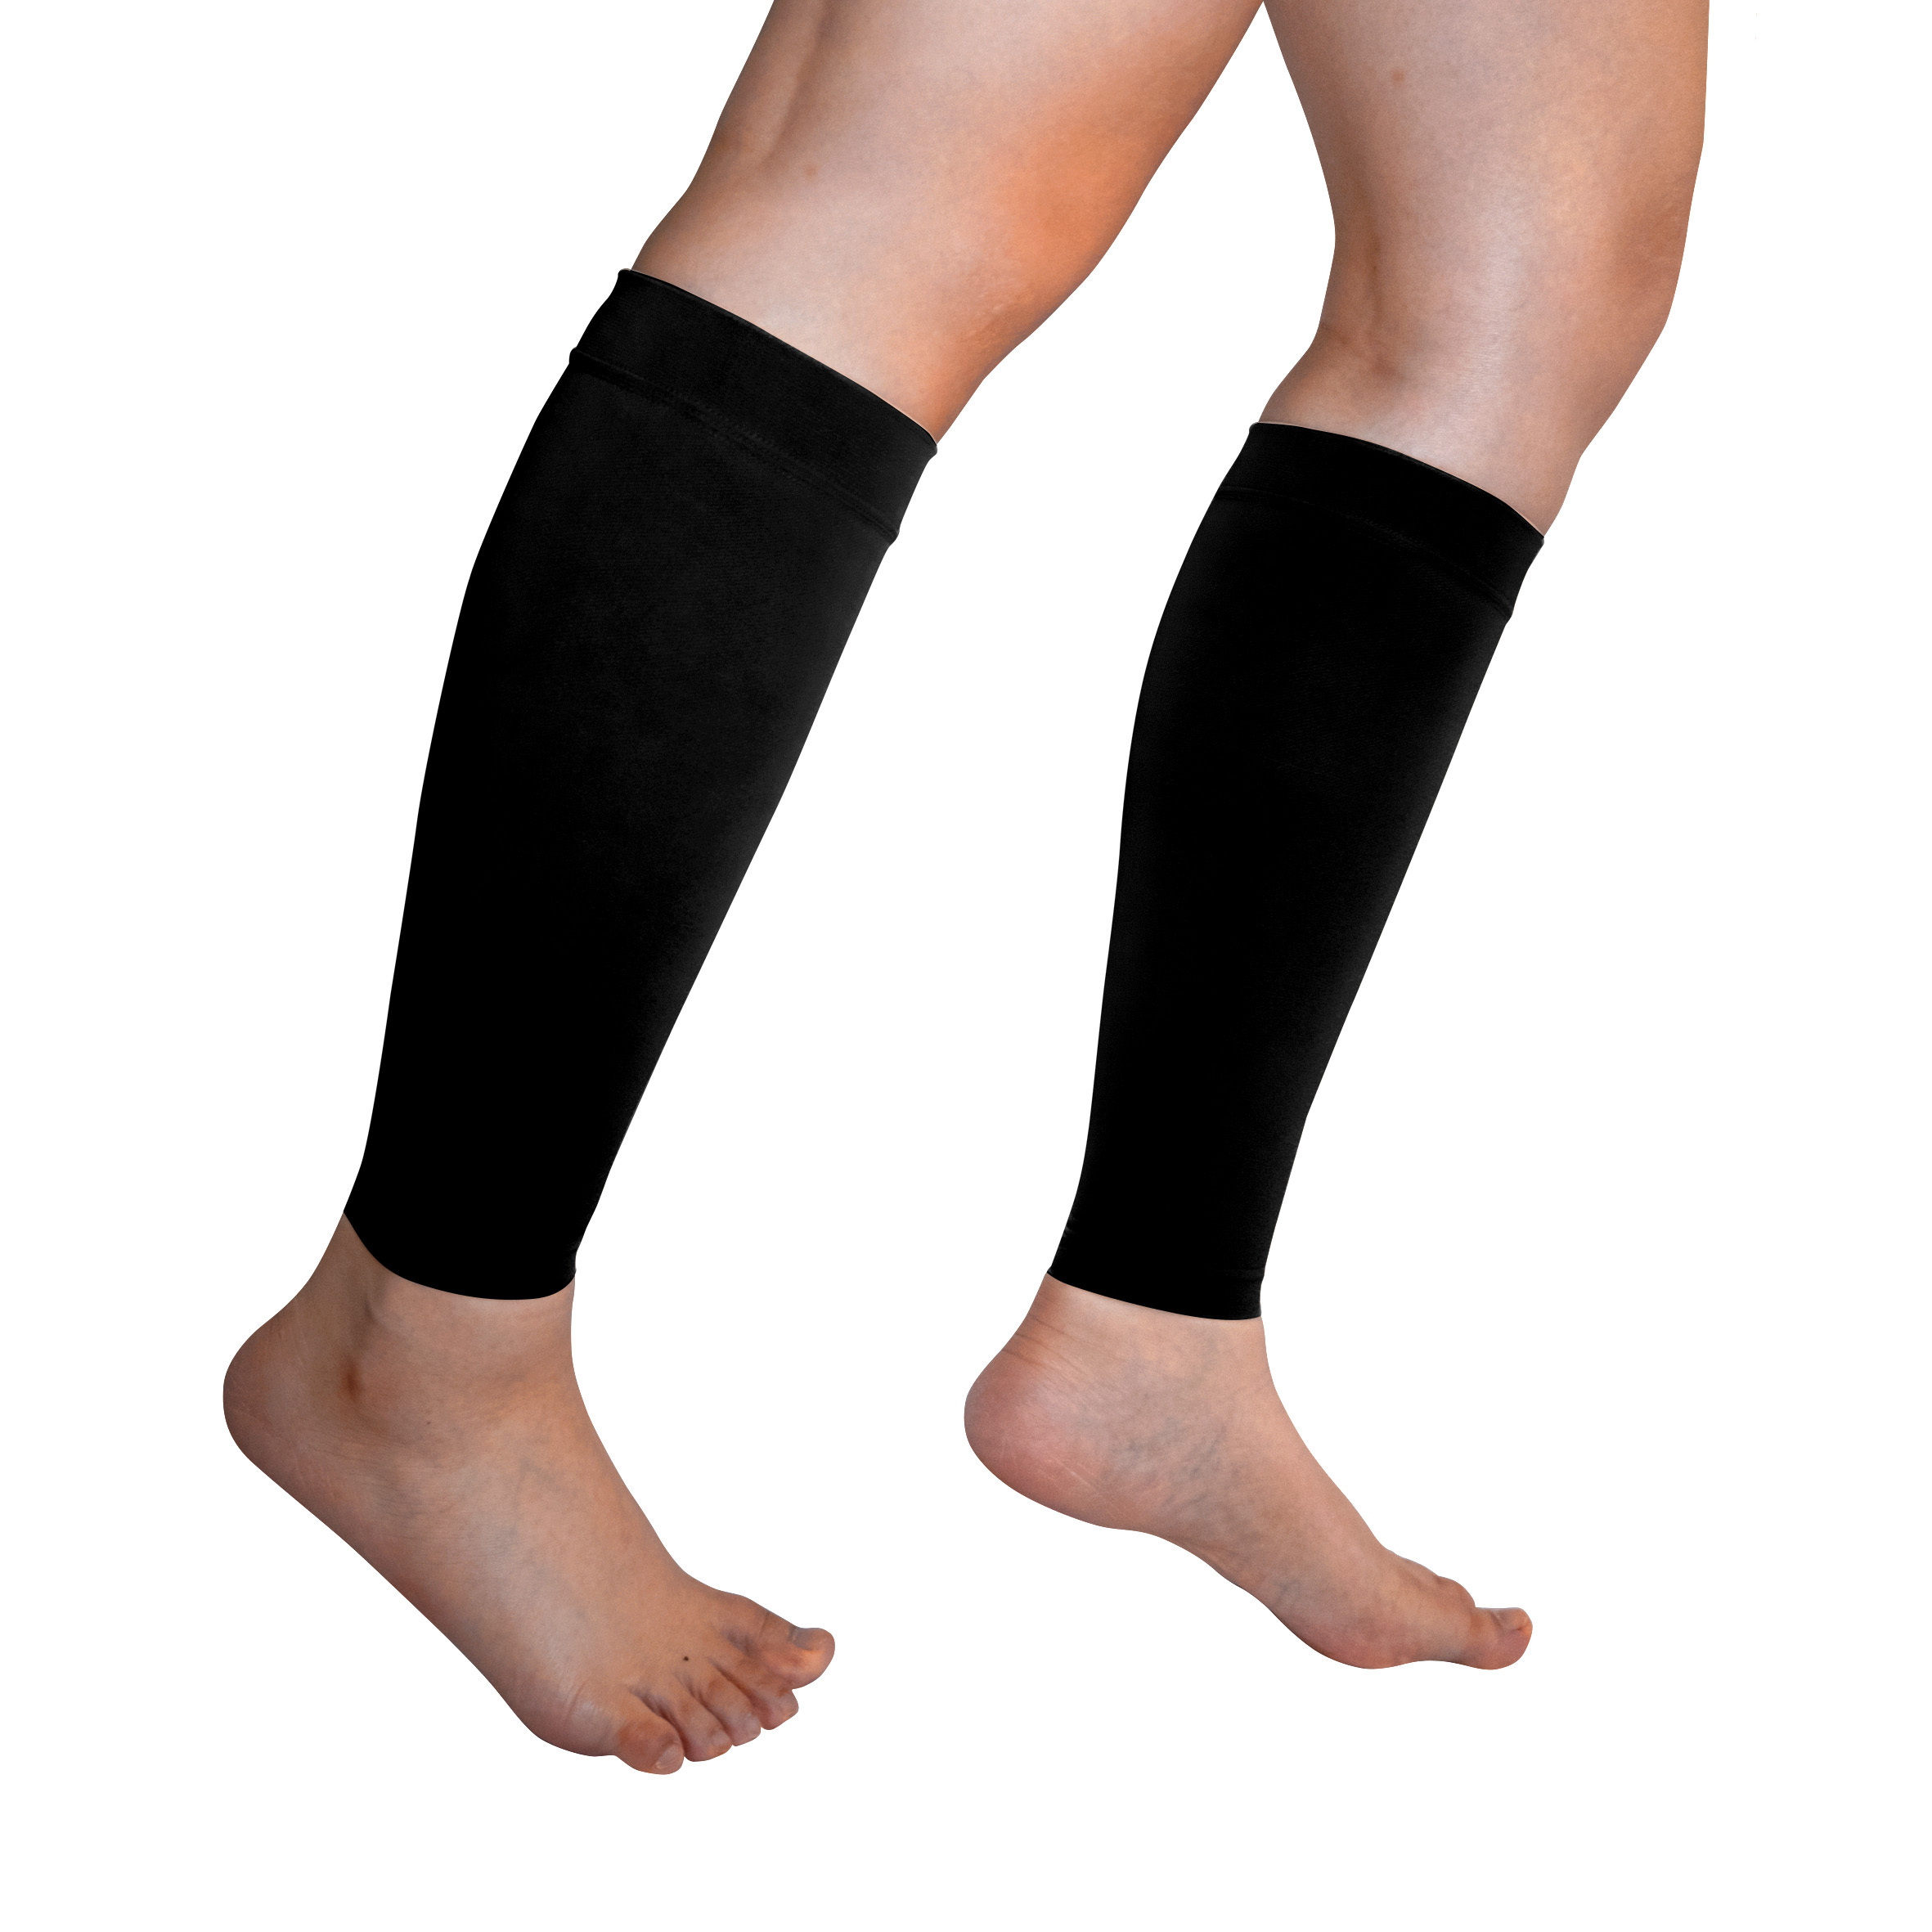  Calf Compression Sleeves for Men and Women - (1 Pair) Footless Compression  Socks Support for Varicose Vein, Nursing, Pregnancy, Running - PhysFlex Leg  Sleeve Brace for Shin Splints, Pain Relief and 